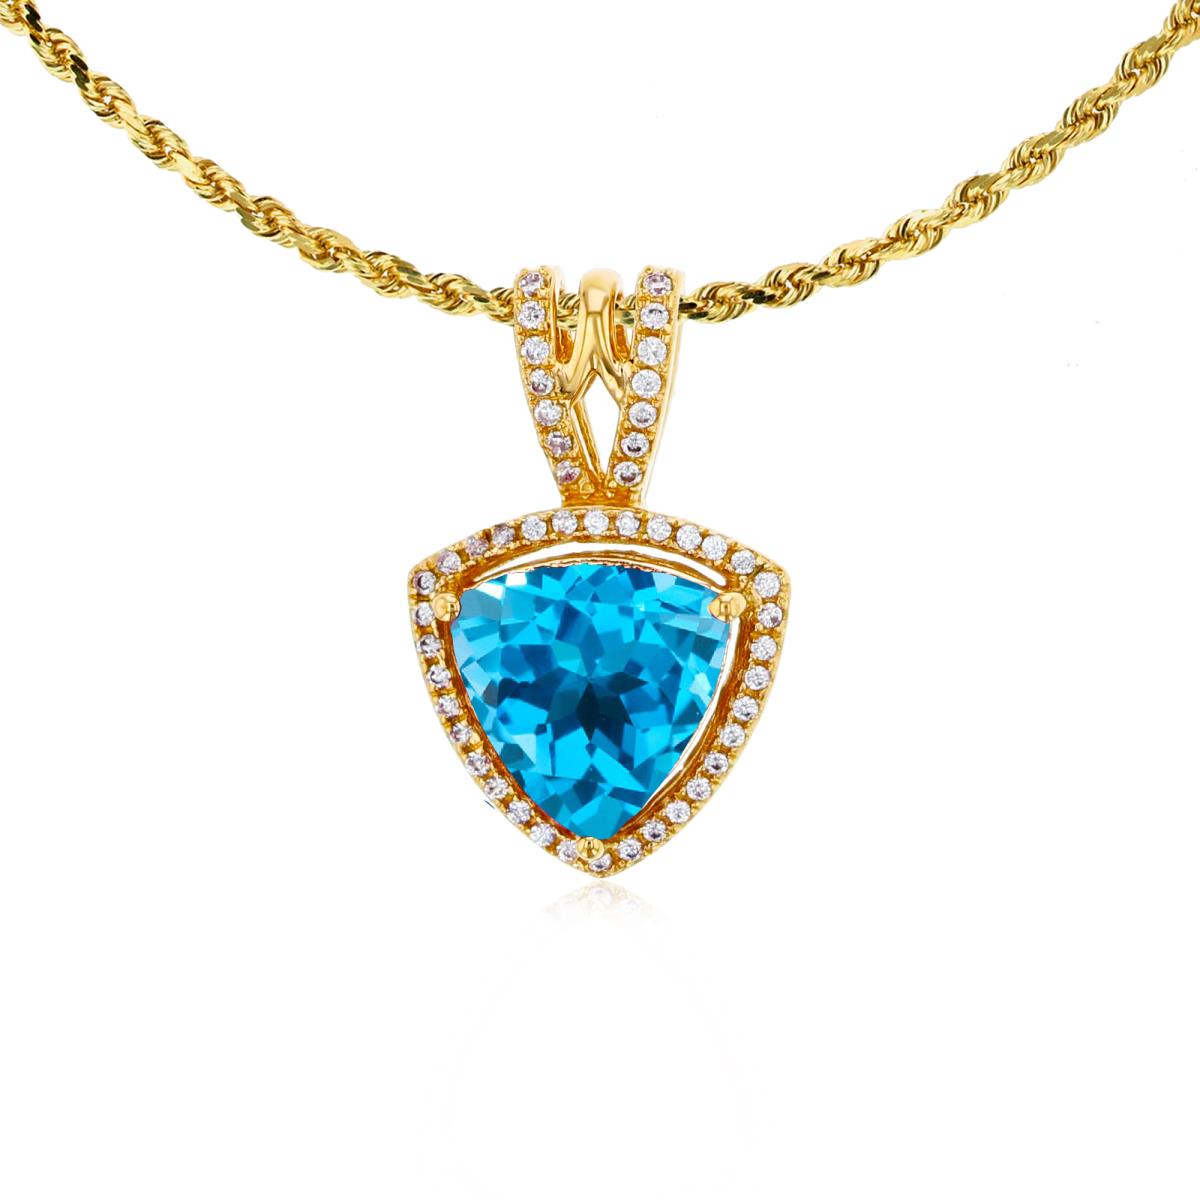 14K Yellow Gold 8mm Trillion Swiss Blue Topaz & 0.13 CTTW Diamonds Frame 18" Rope Chain Necklace